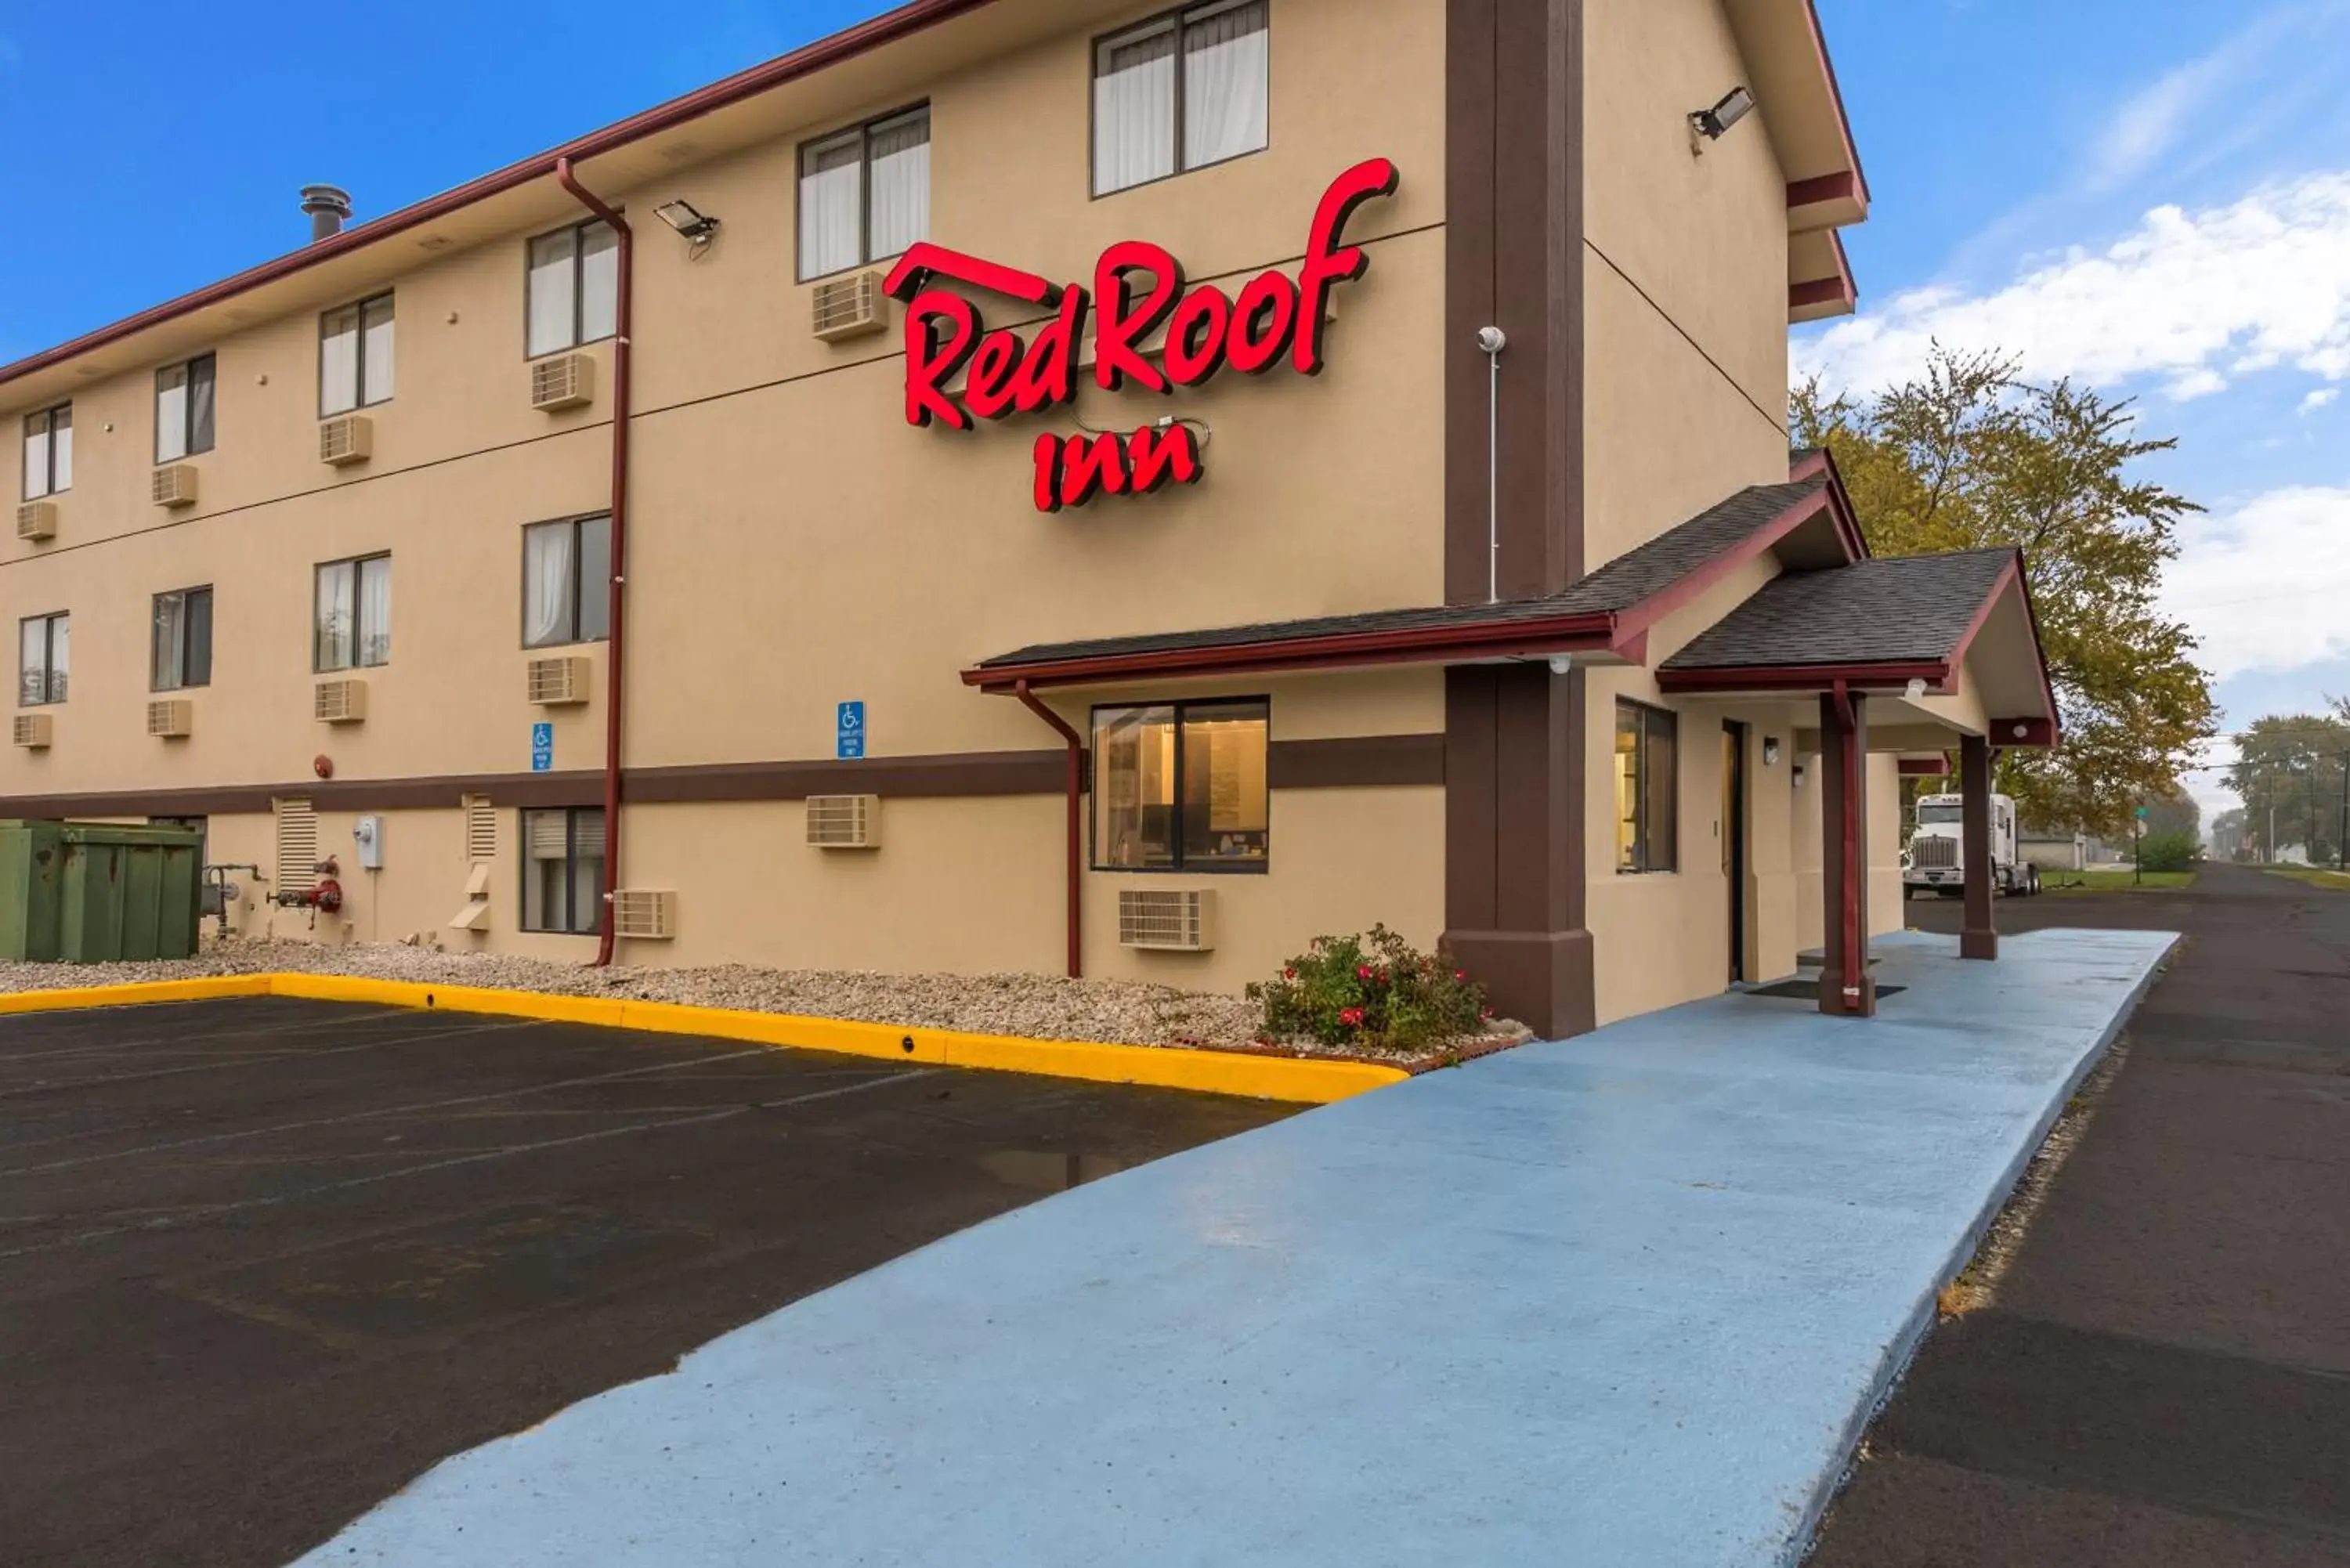 Property Building in Red Roof Inn Findlay